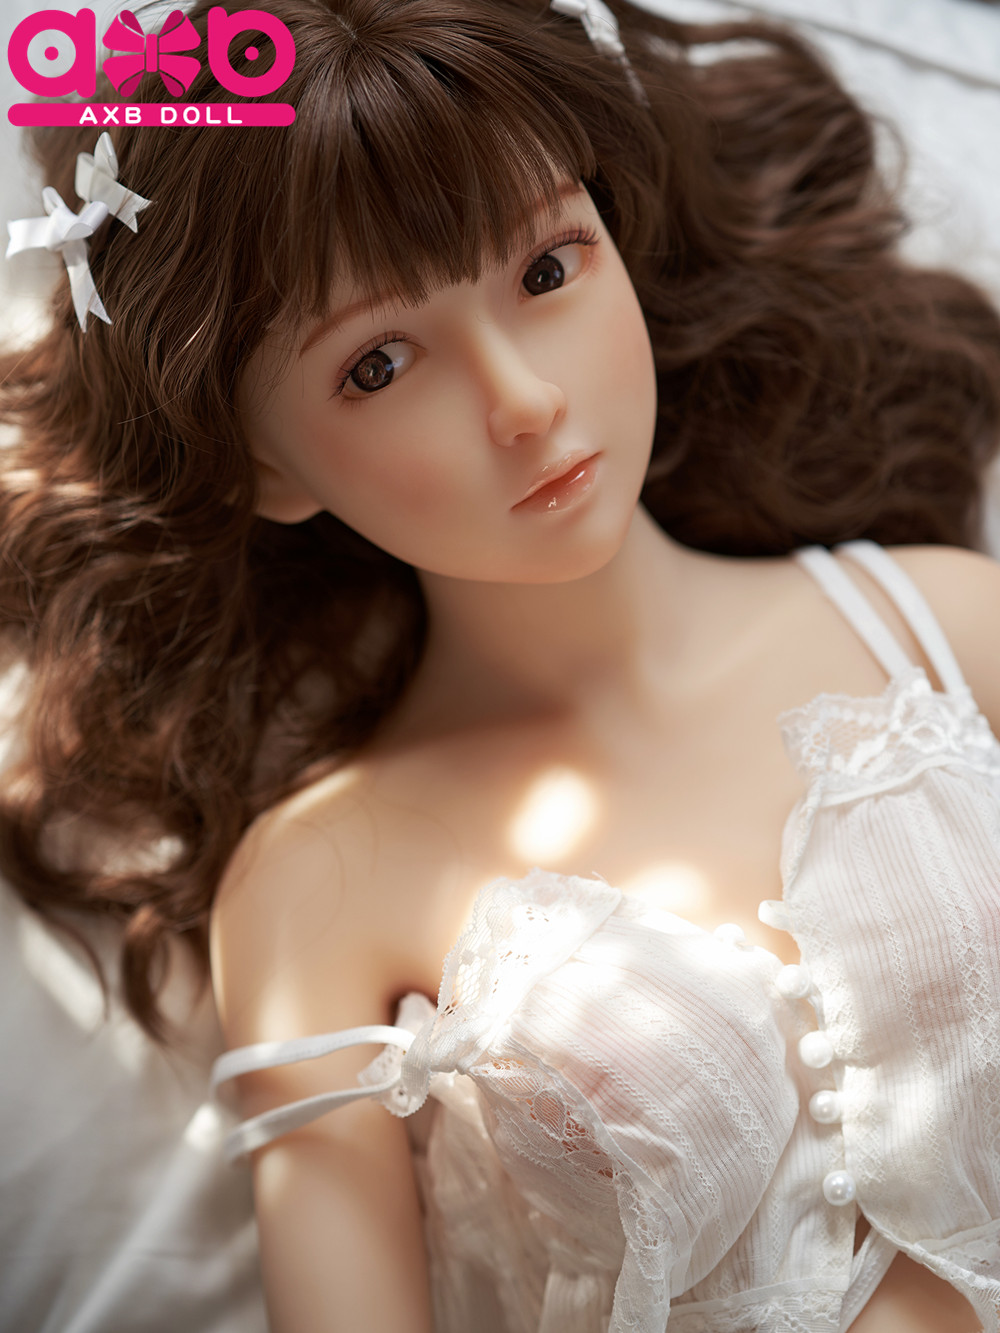 AXBDOLL 130cm A130 TPE Anime Oral Love Doll Sex Product For Men - Click Image to Close